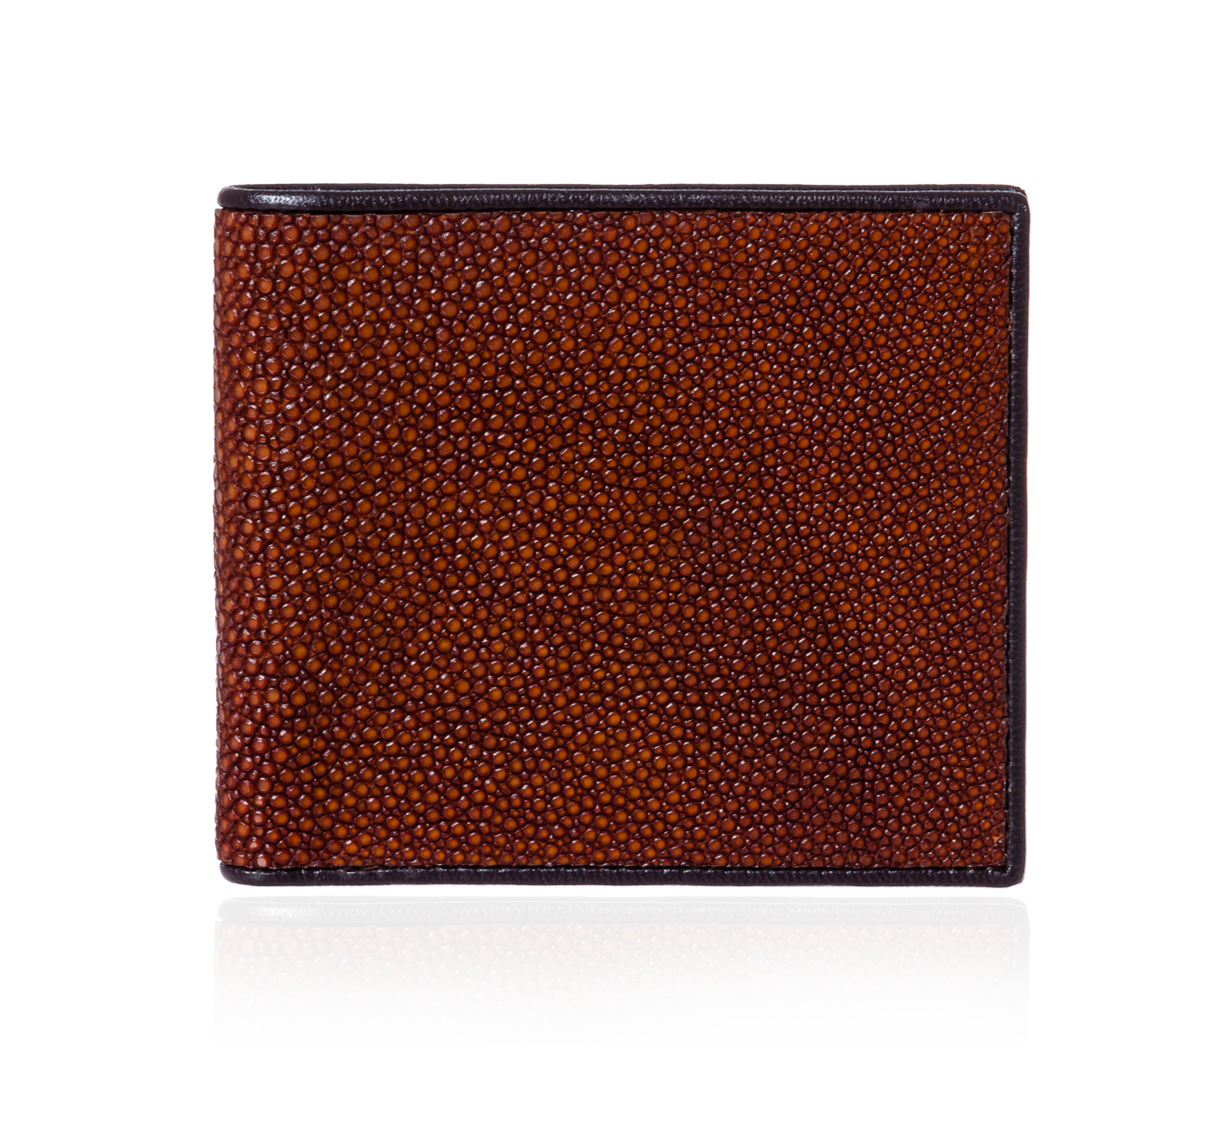 Brown Stingray Leather Wallet